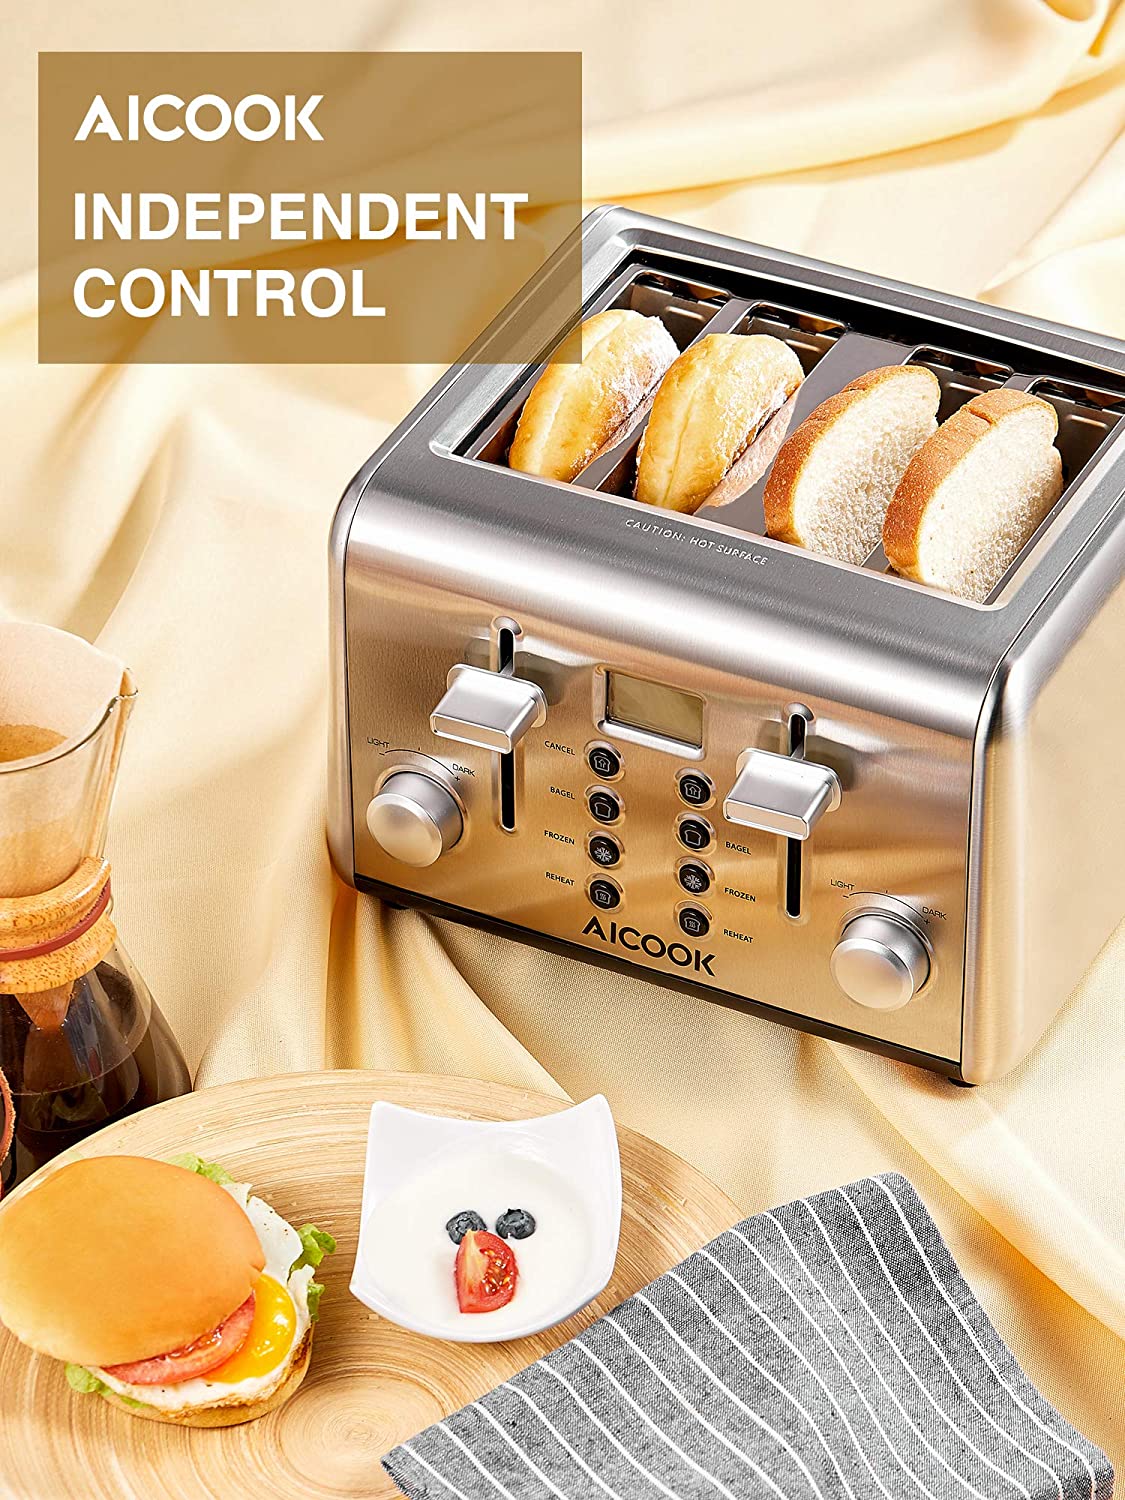 AICOOK |  Retro Stainless Steel Toaster 4 Slice, Toaster with 4 Extra-Wide Slots, Removal Crumb Tray, 6 Browning Settings, Independent Control